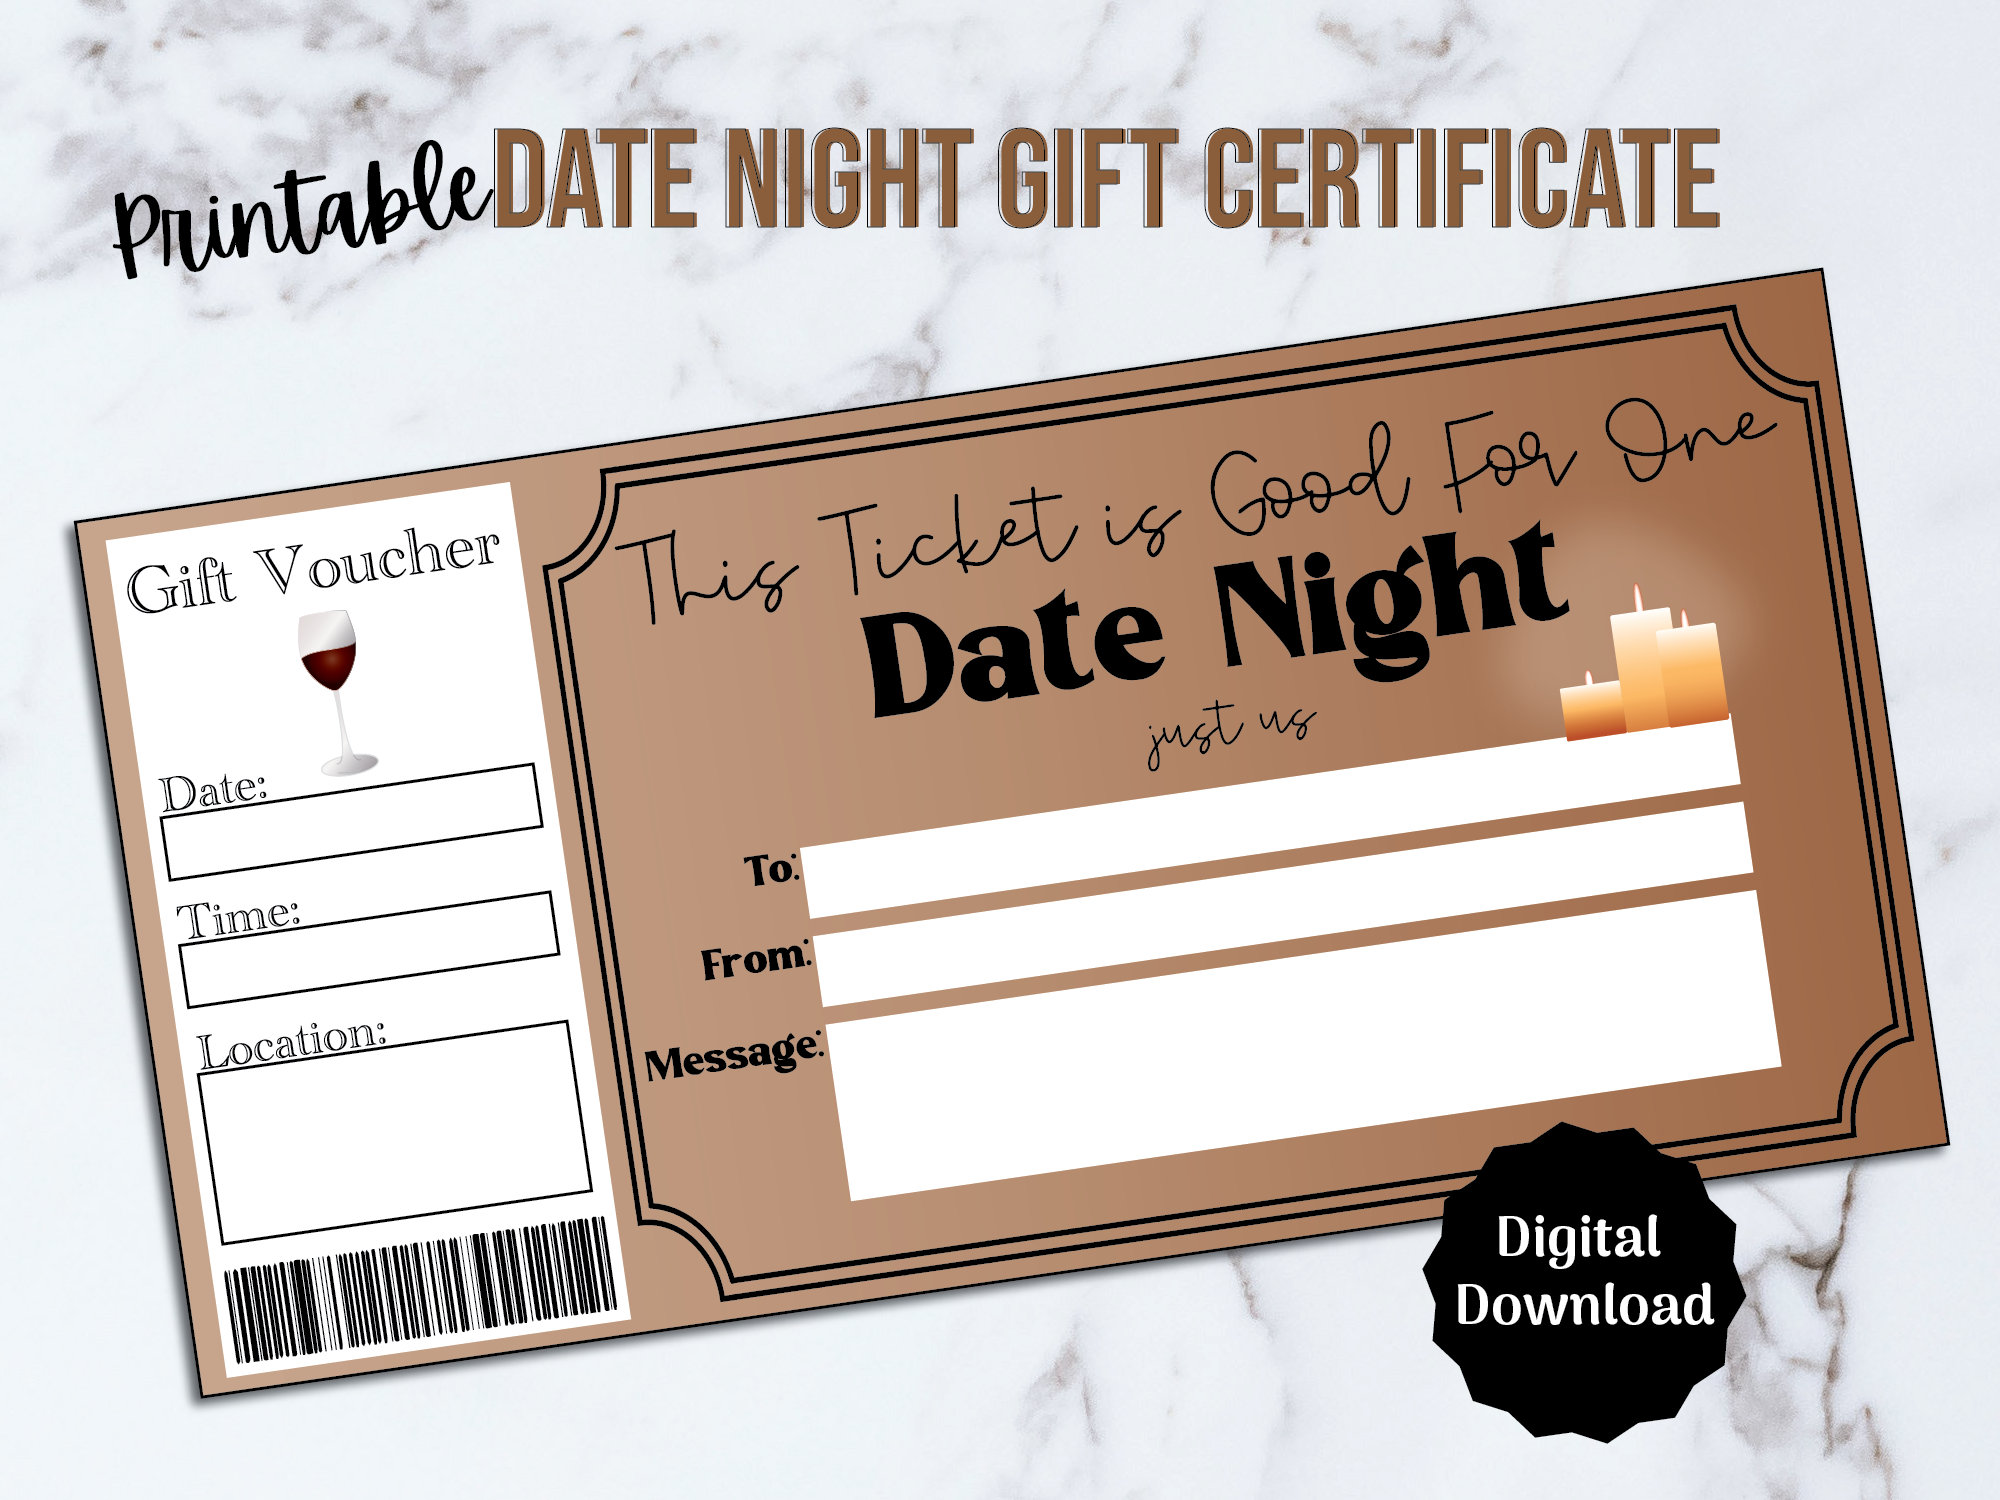 Date Night Couples Games Printable Games for Couples Mr & Mrs Printable Date  Night Romantic Date Digital Download 